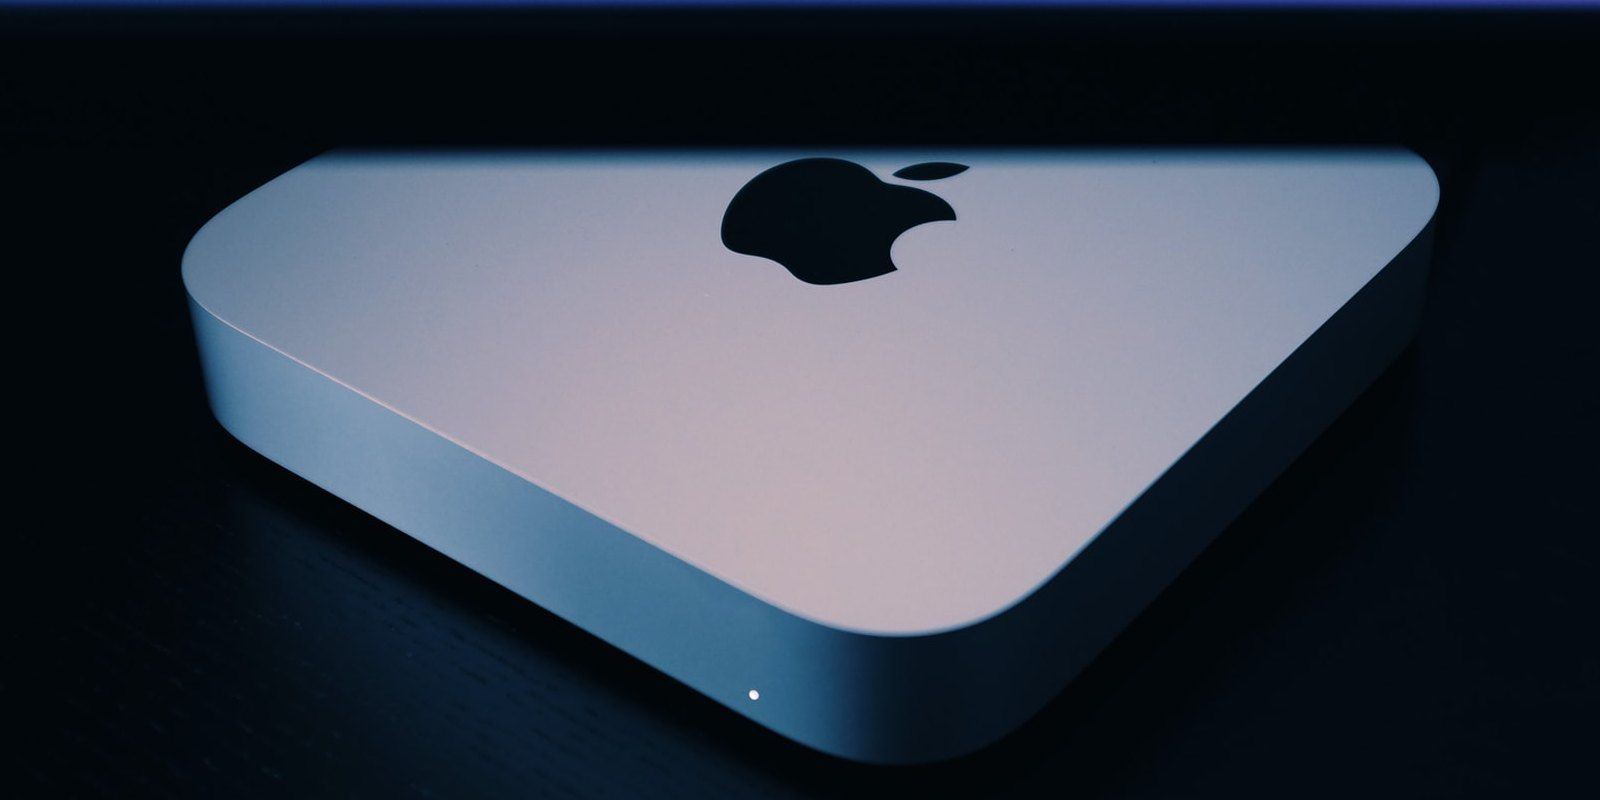 Apple Mac Mini by Charles Patterson for Unsplash